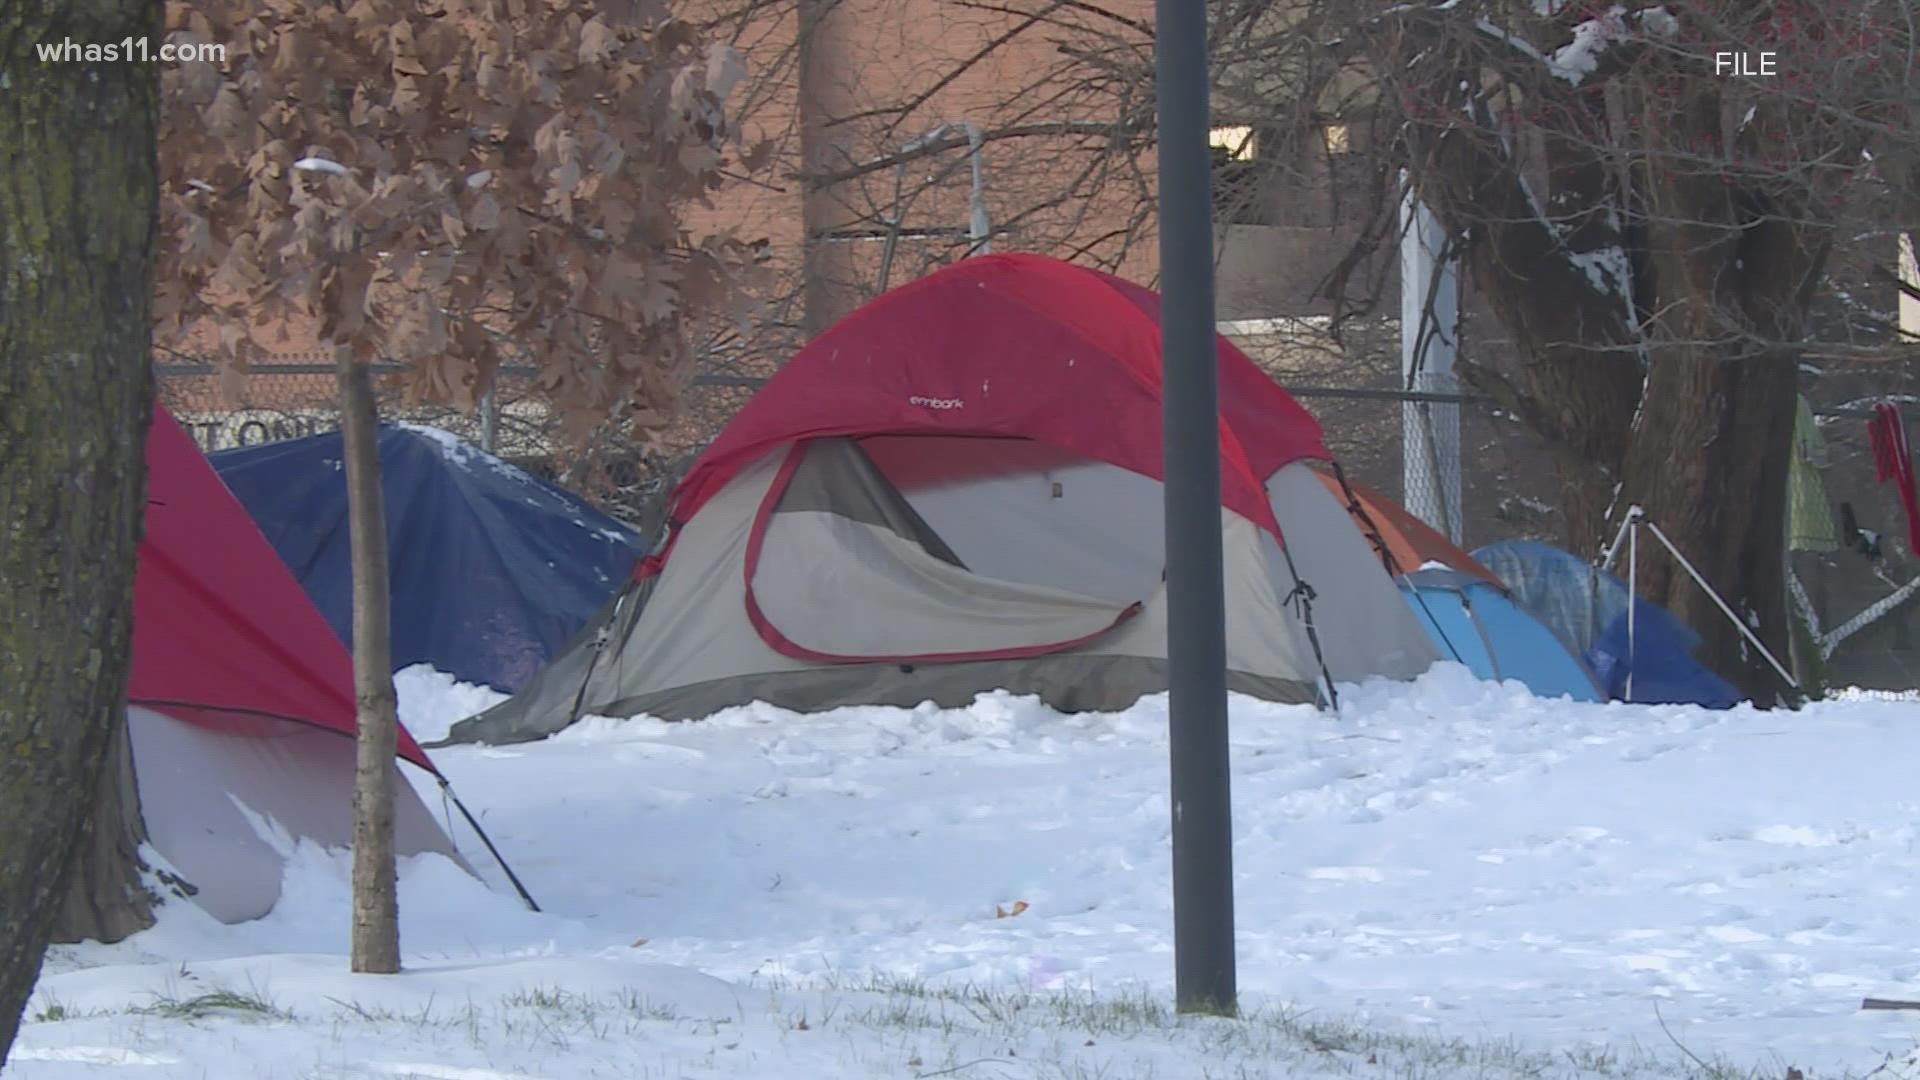 Voice of Truth Church on Valley Station Road is meeting a need by providing pop up shelters for the homeless this winter